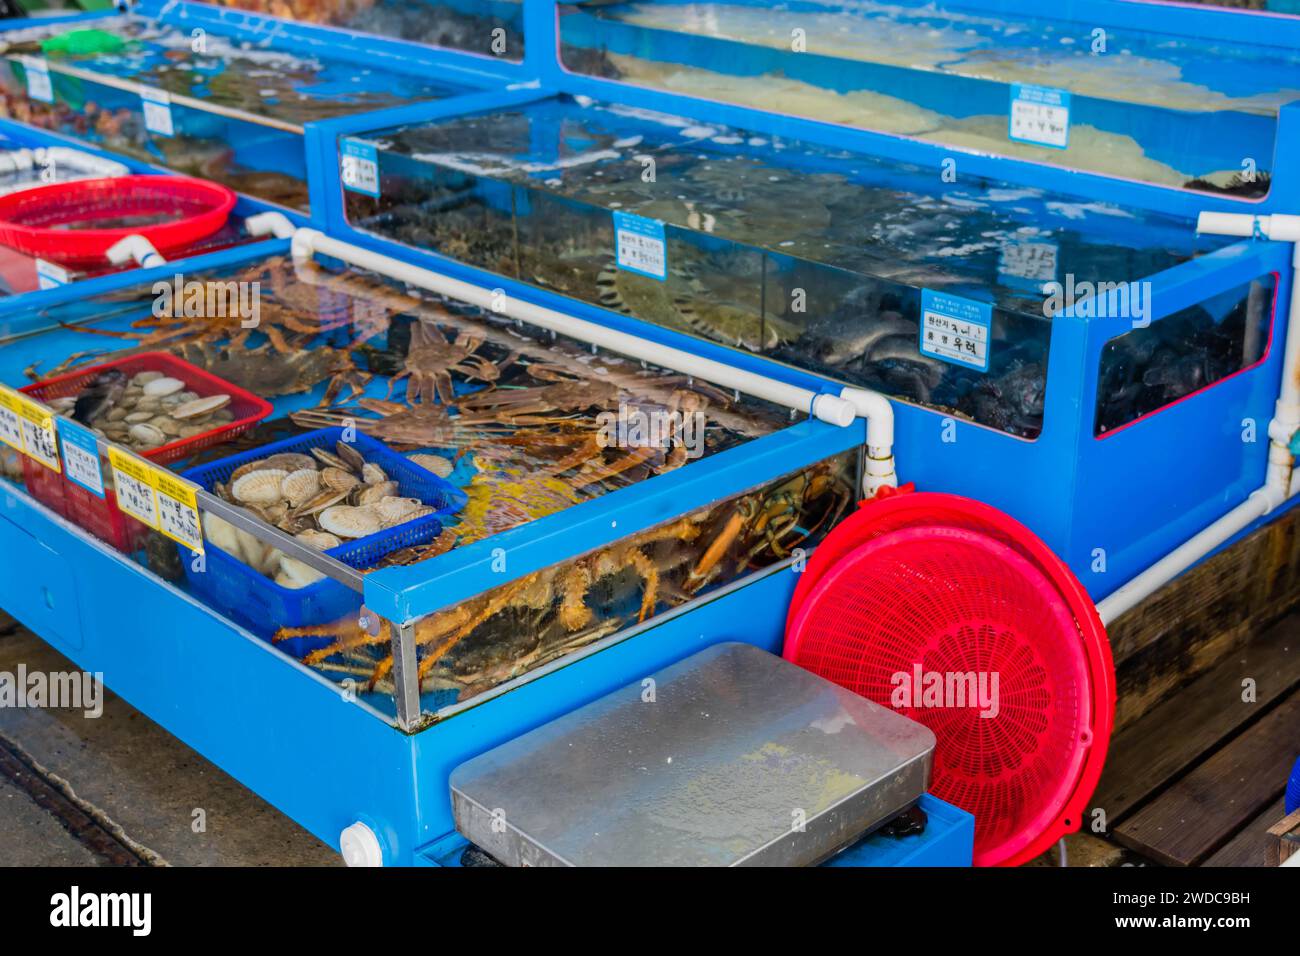 Water tanks filled with crab and assorted fish for sale at seaport market, South Korea, South Korea Stock Photo